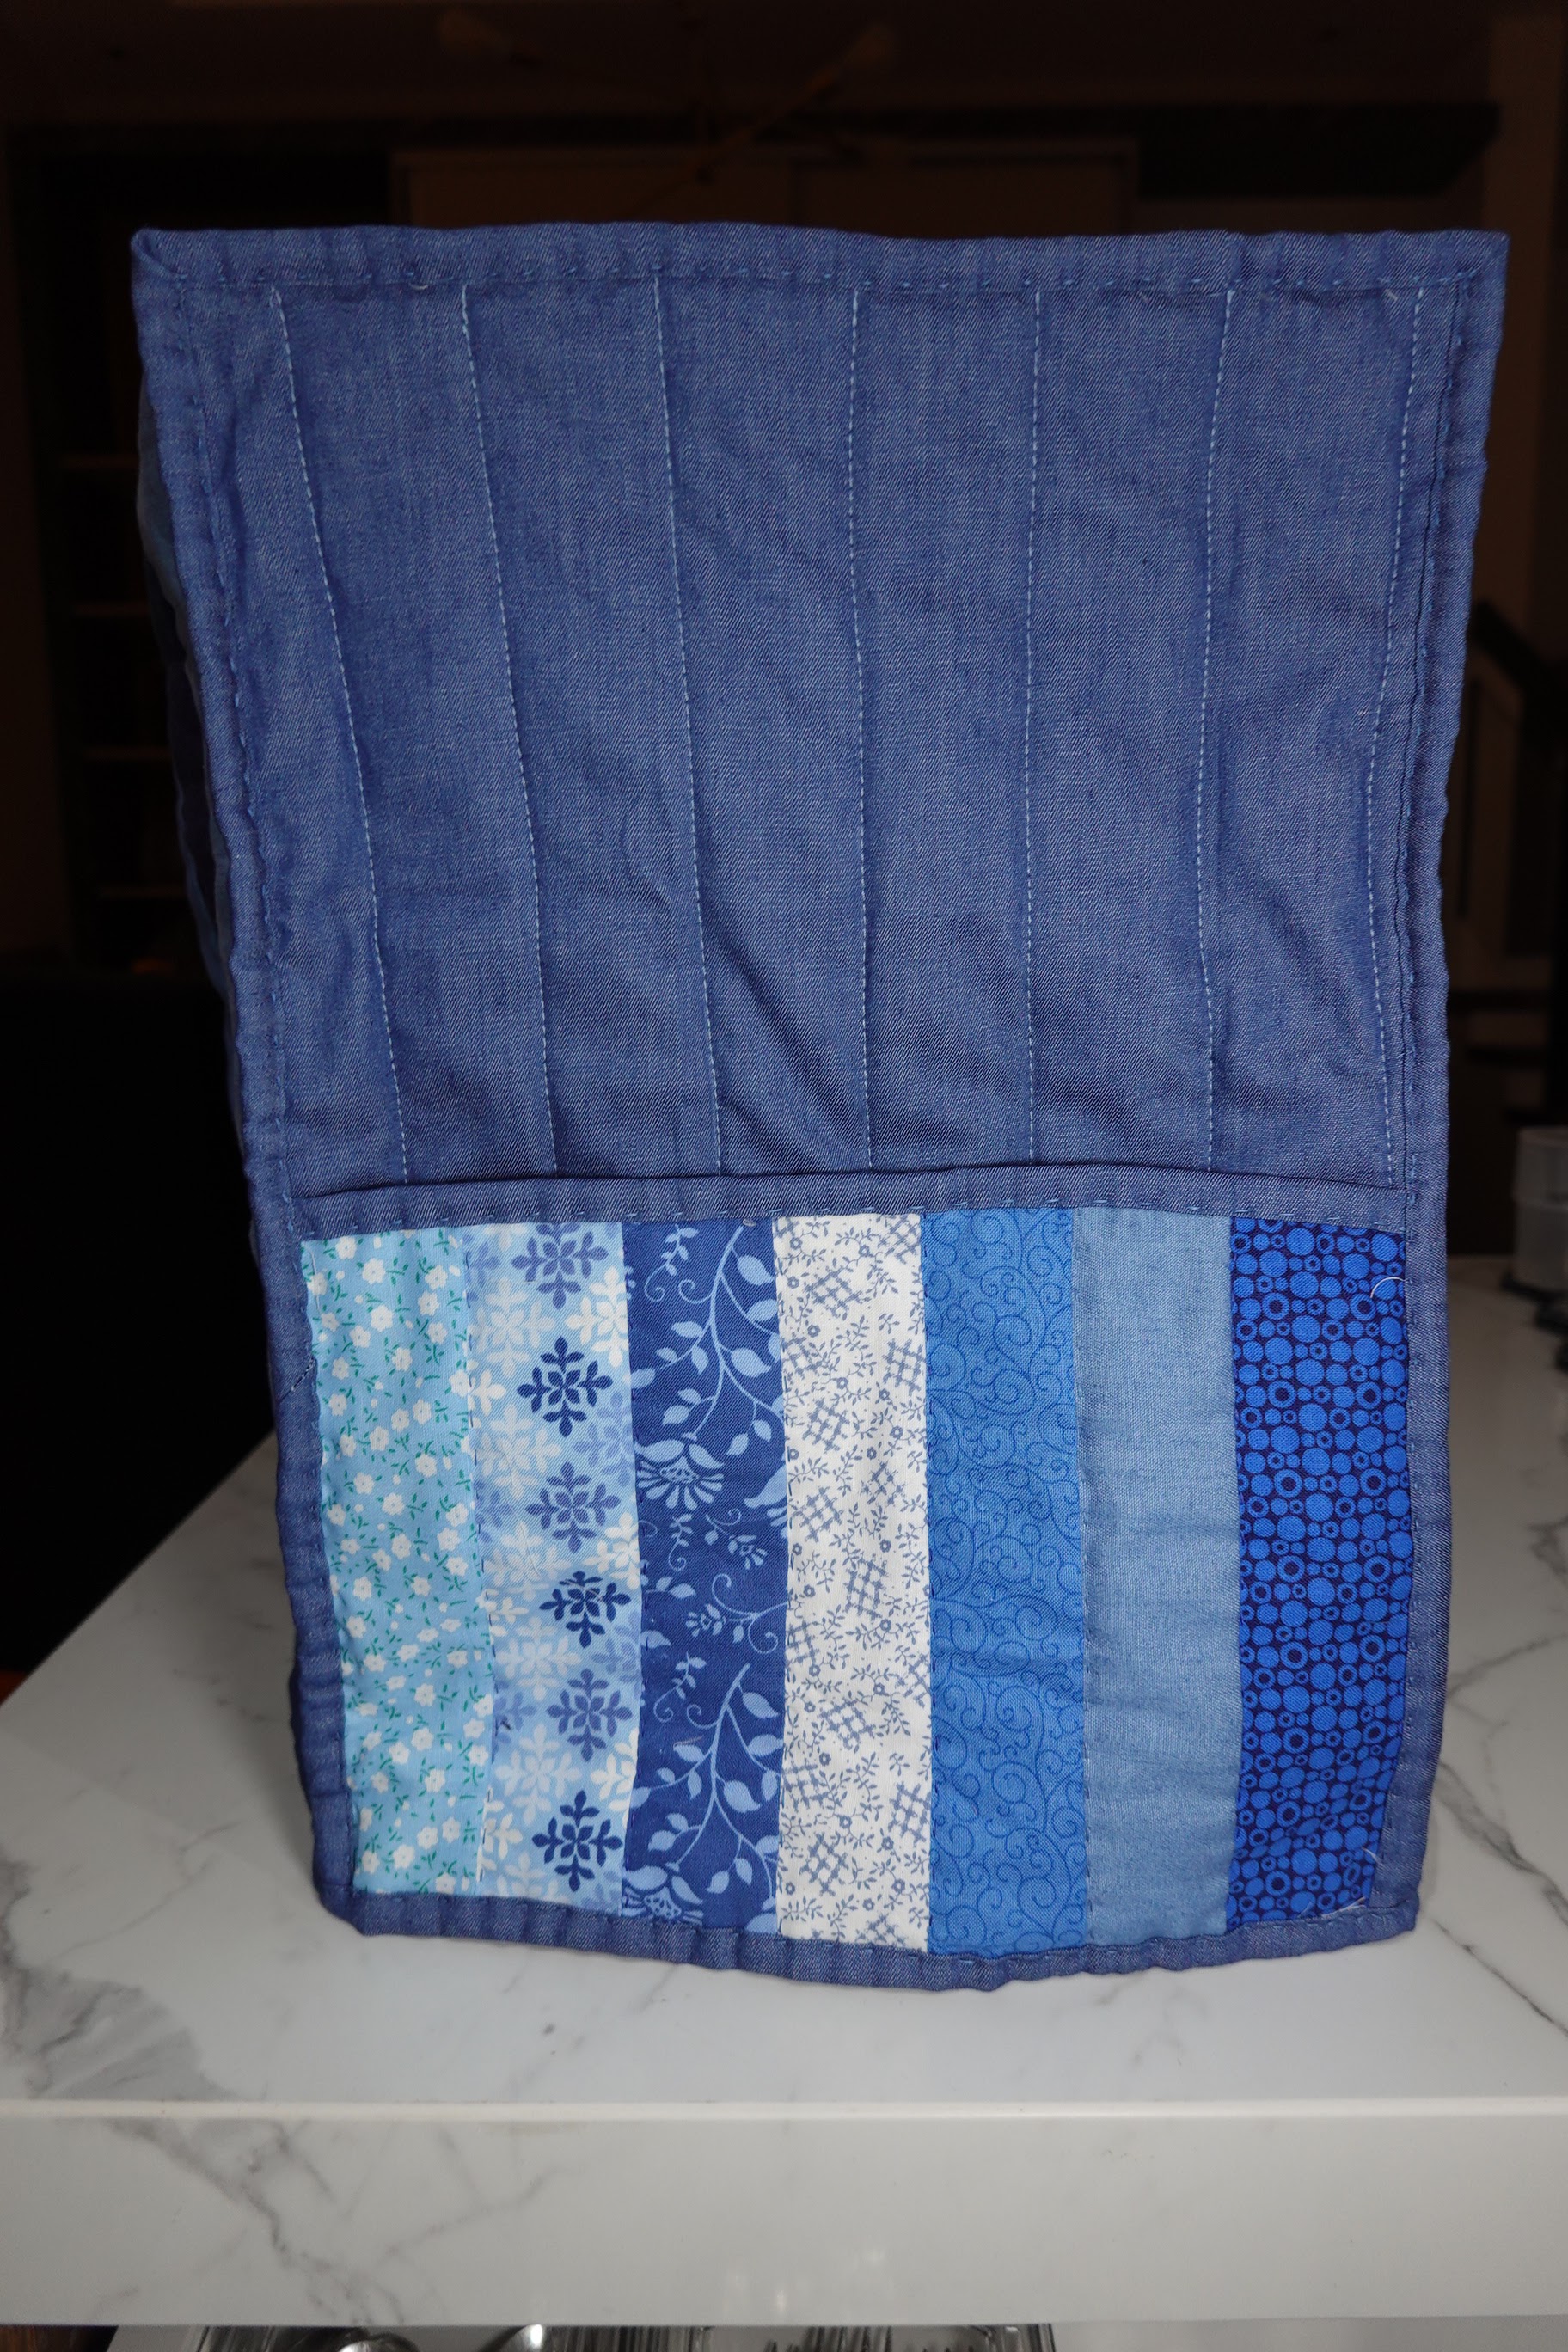 Stitching: Turned the Cat Quilt into a KitchenAid Cover